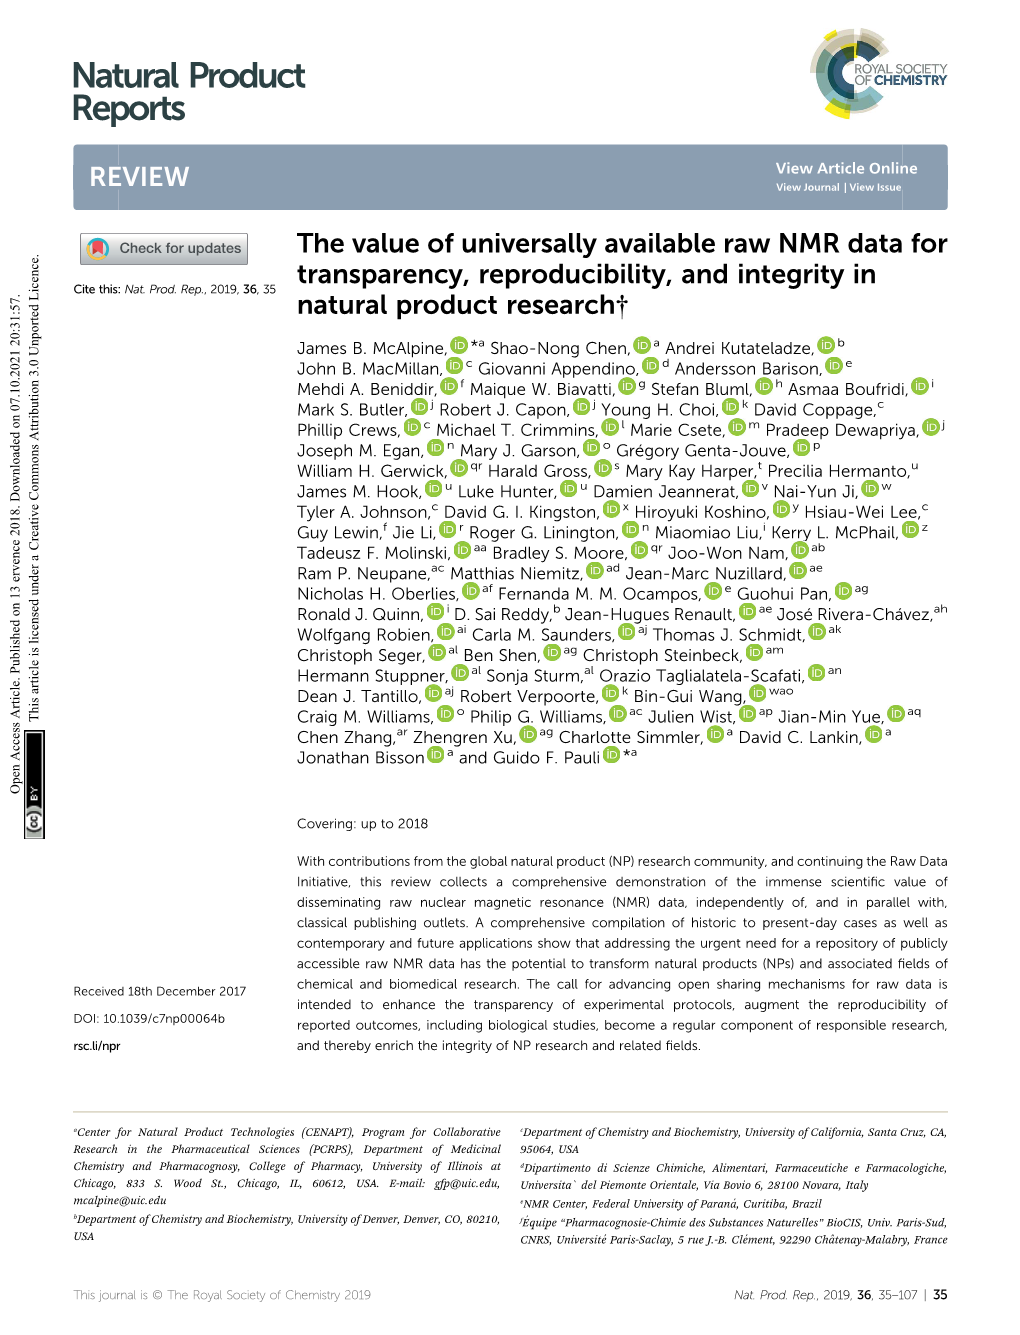 The Value of Universally Available Raw NMR Data for Transparency, Reproducibility, and Integrity in Cite This: Nat